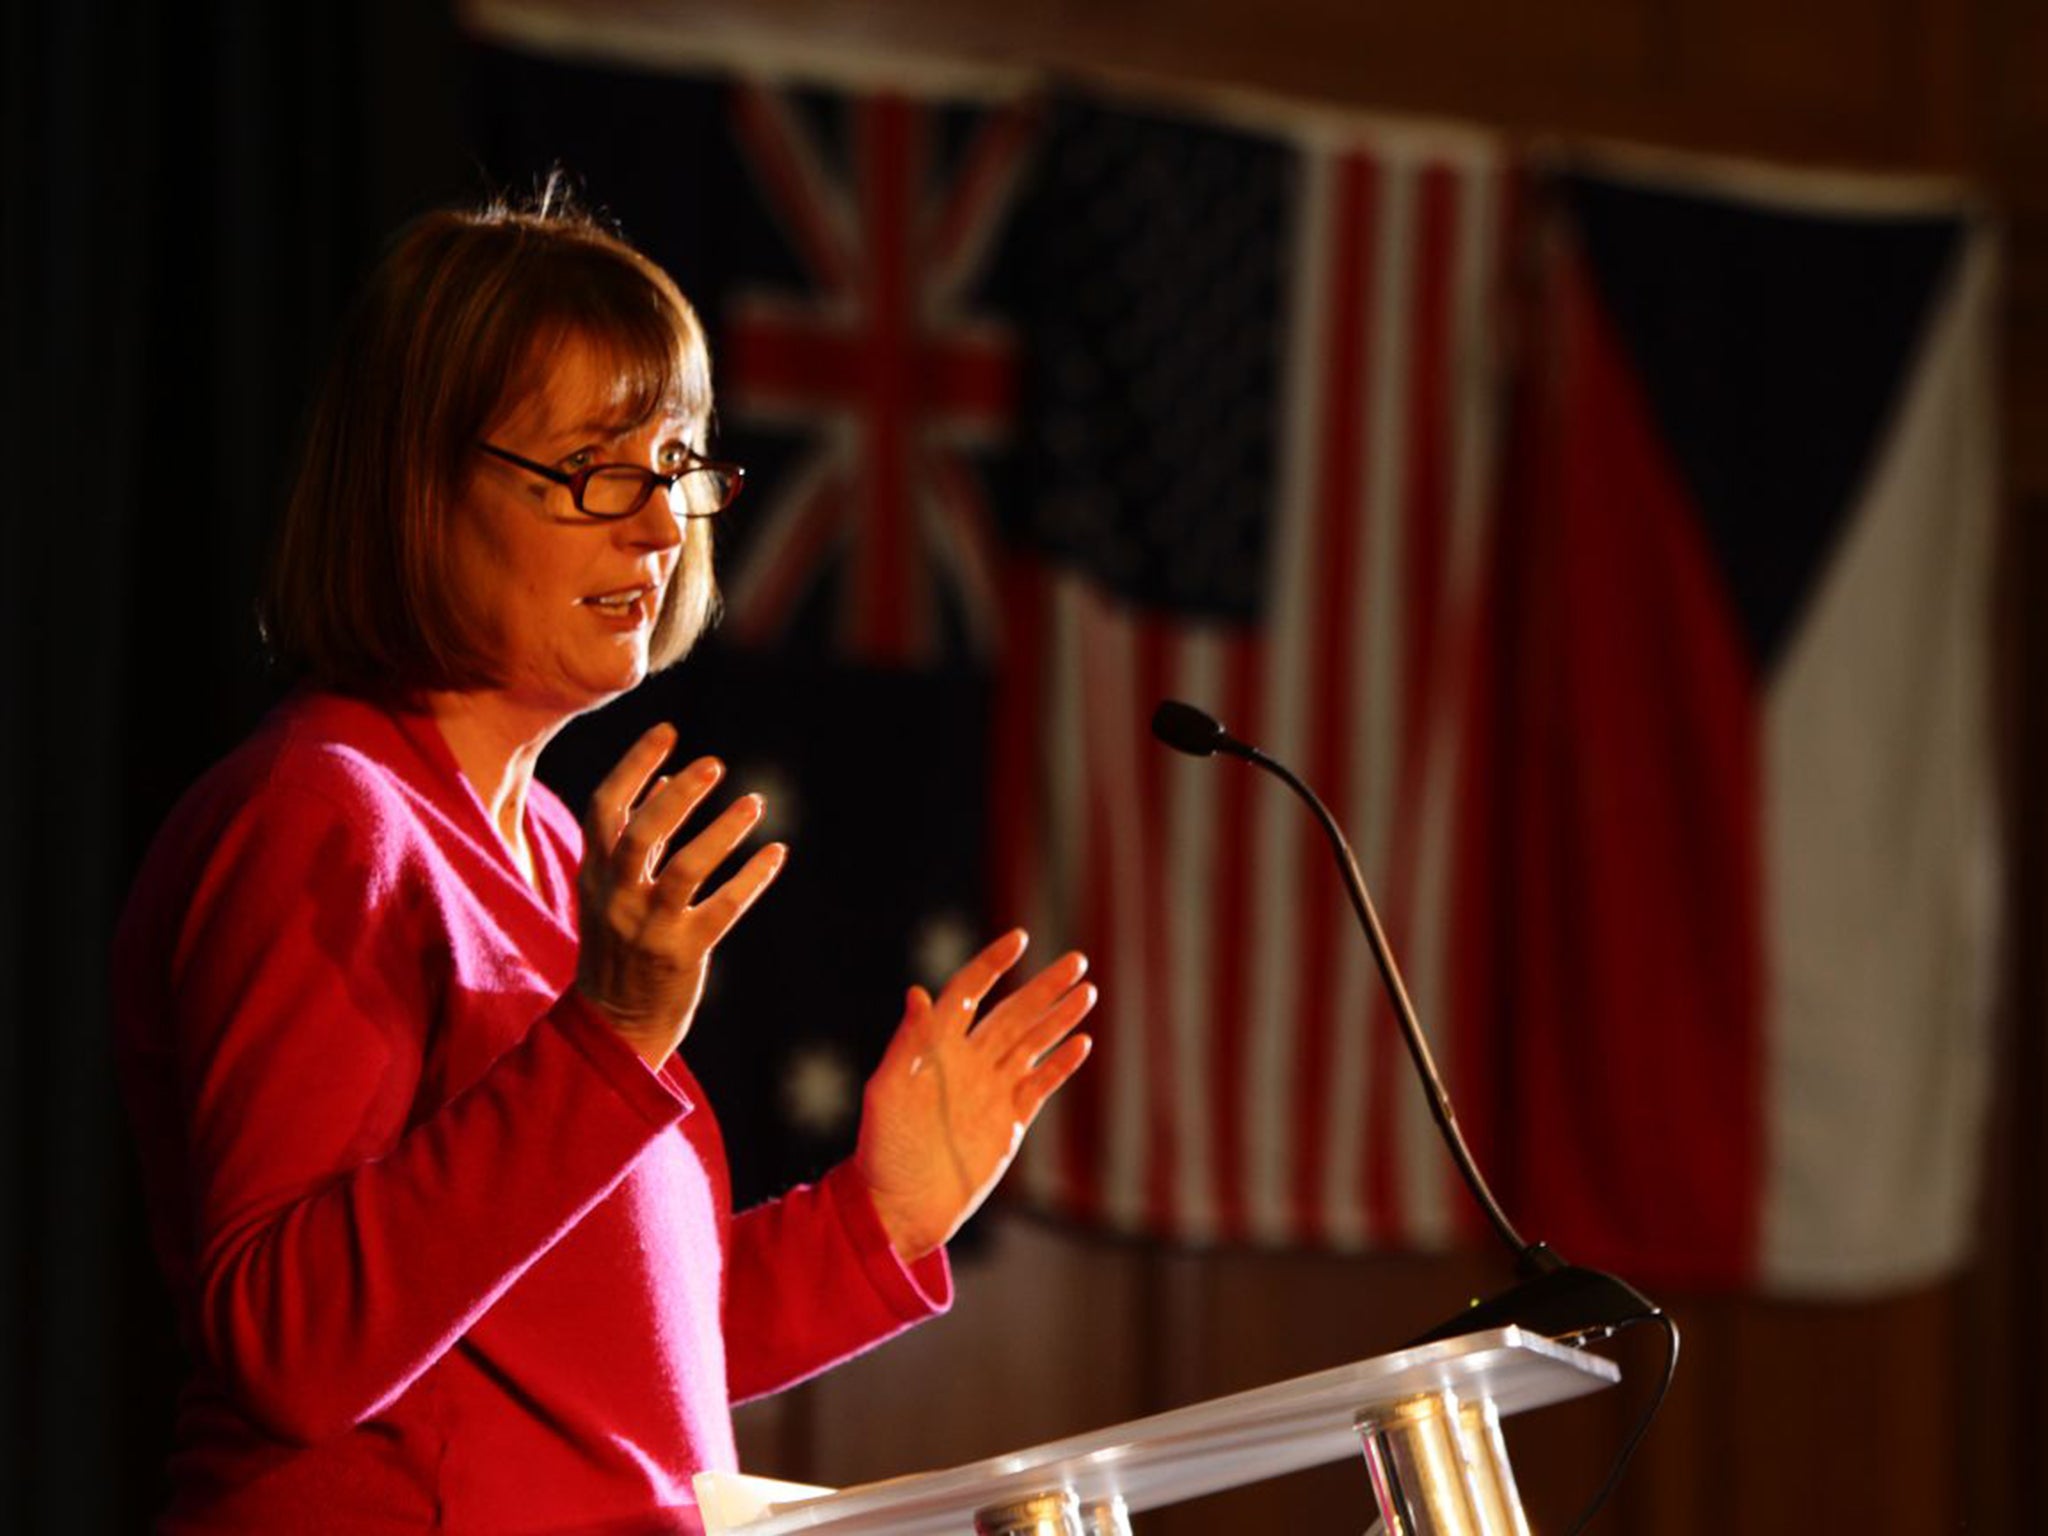 Harriet Harman’s manifesto for women is likely to put off rather than attract voters (Richard Maude)